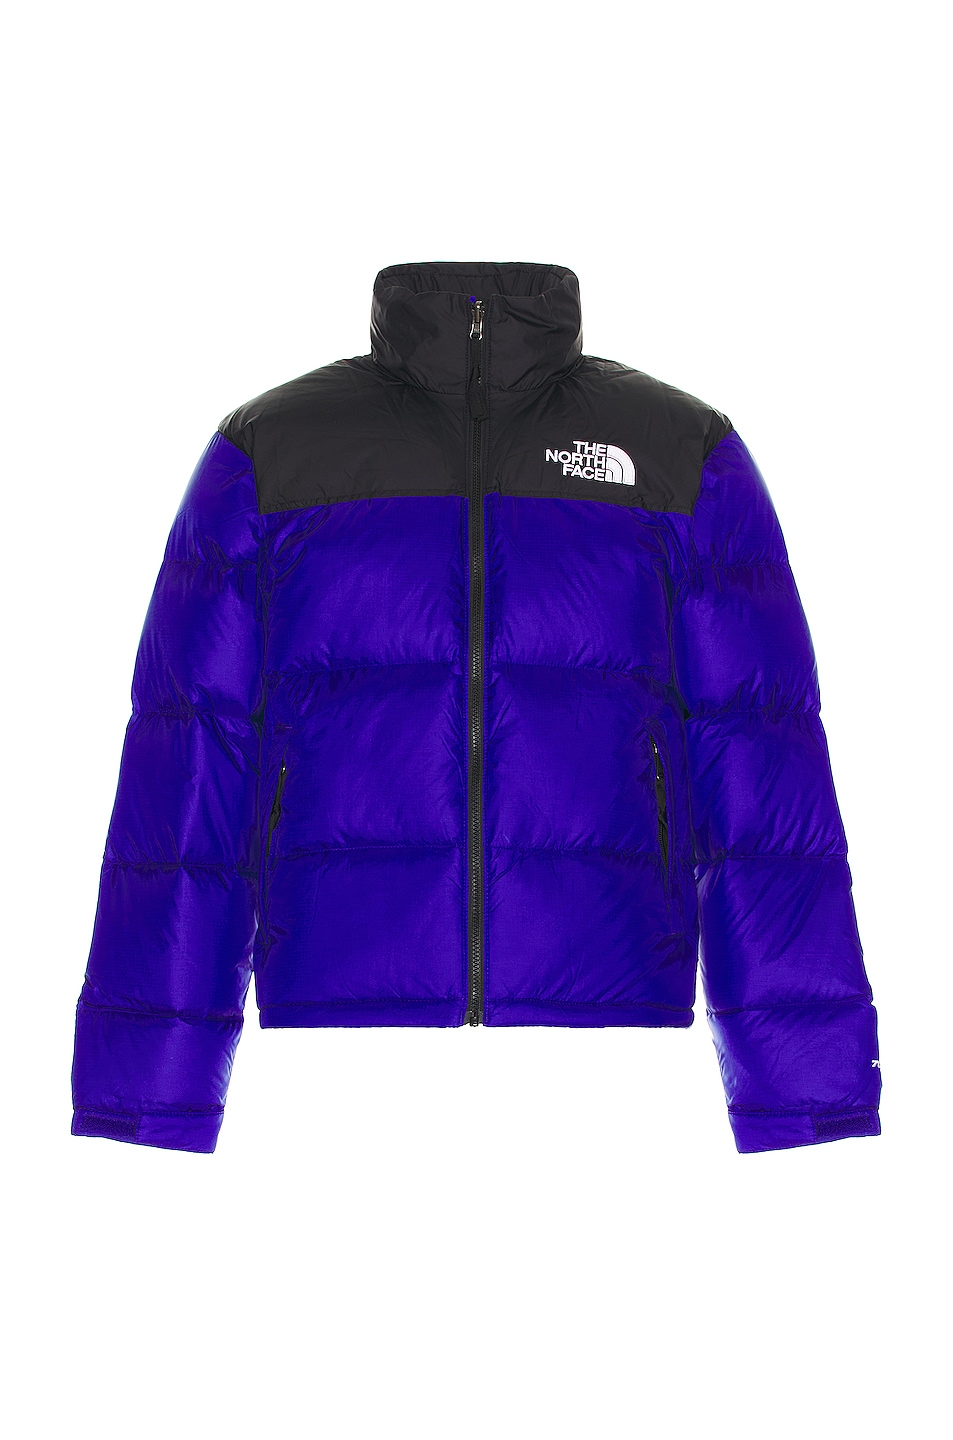 Image 1 of The North Face 1996 Retro Nuptse Jacket in Lapis Blue